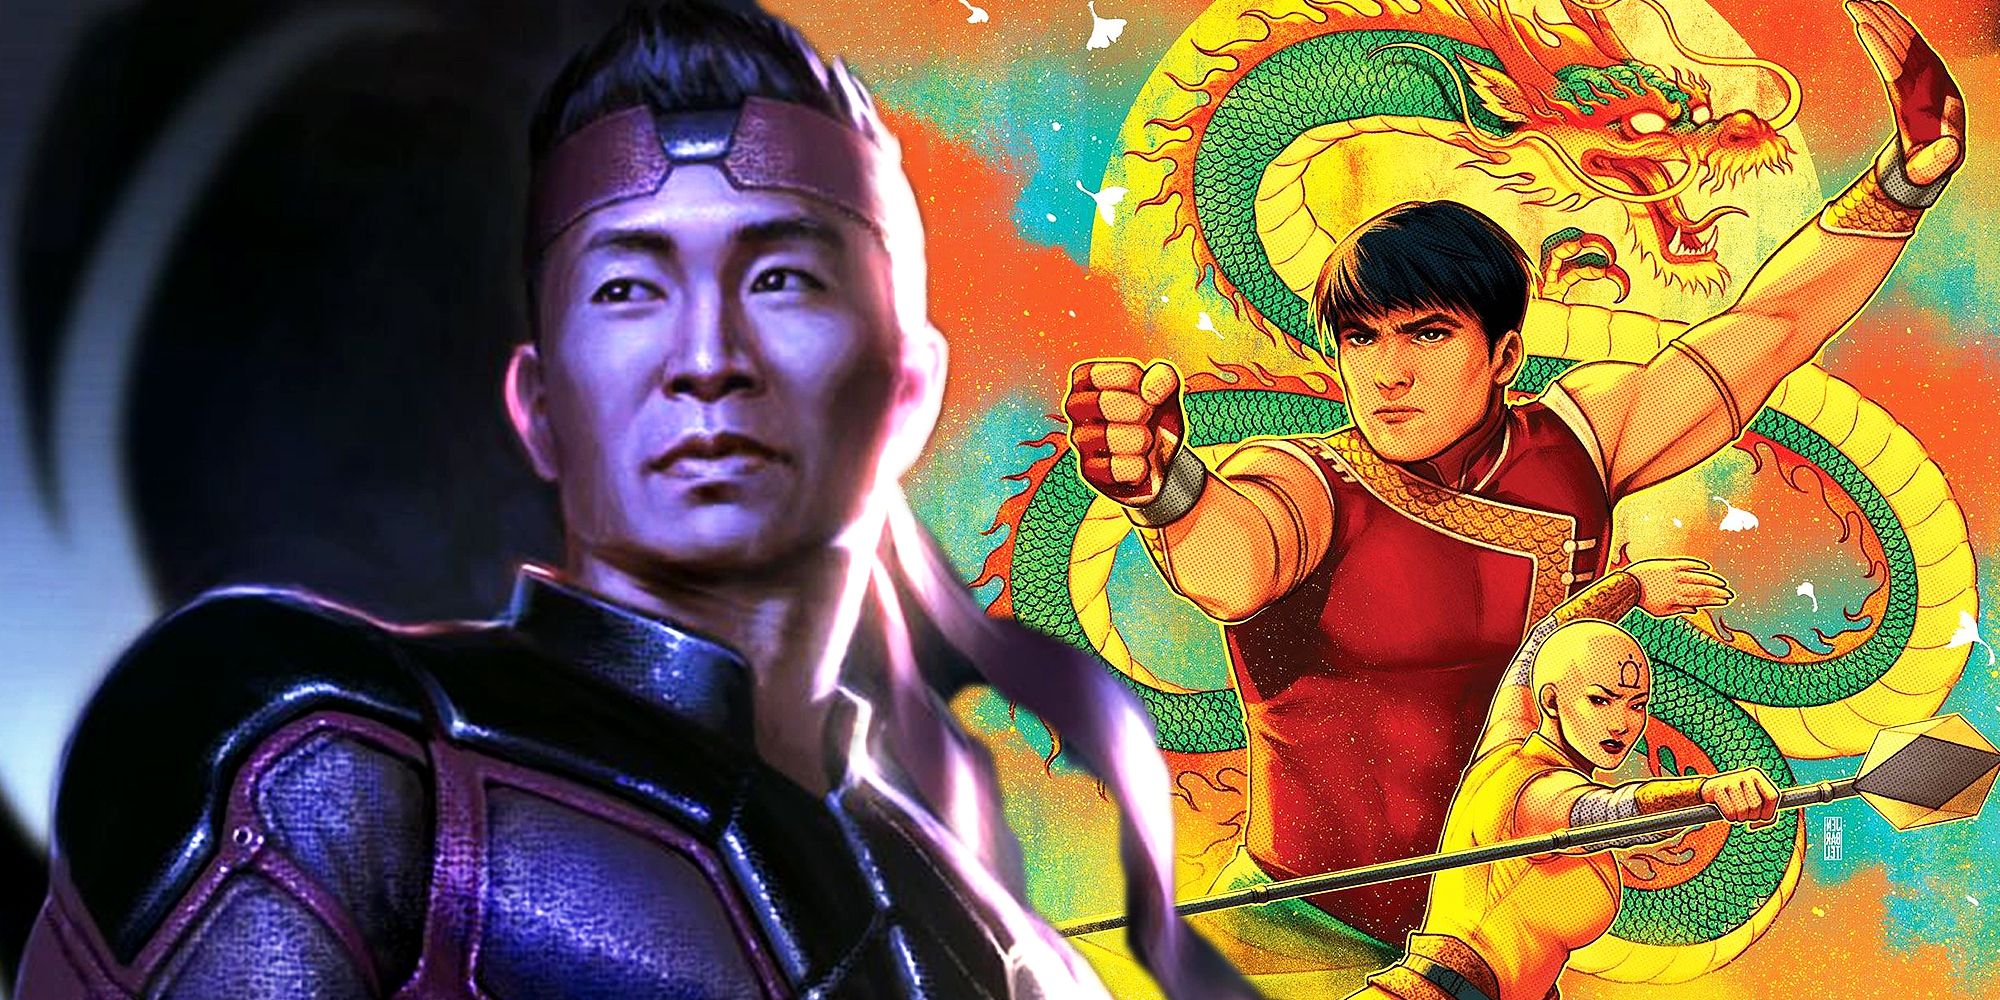 Simu Liu as Shang-Chi and The Legend of the Ten Rings and Marvel Comics